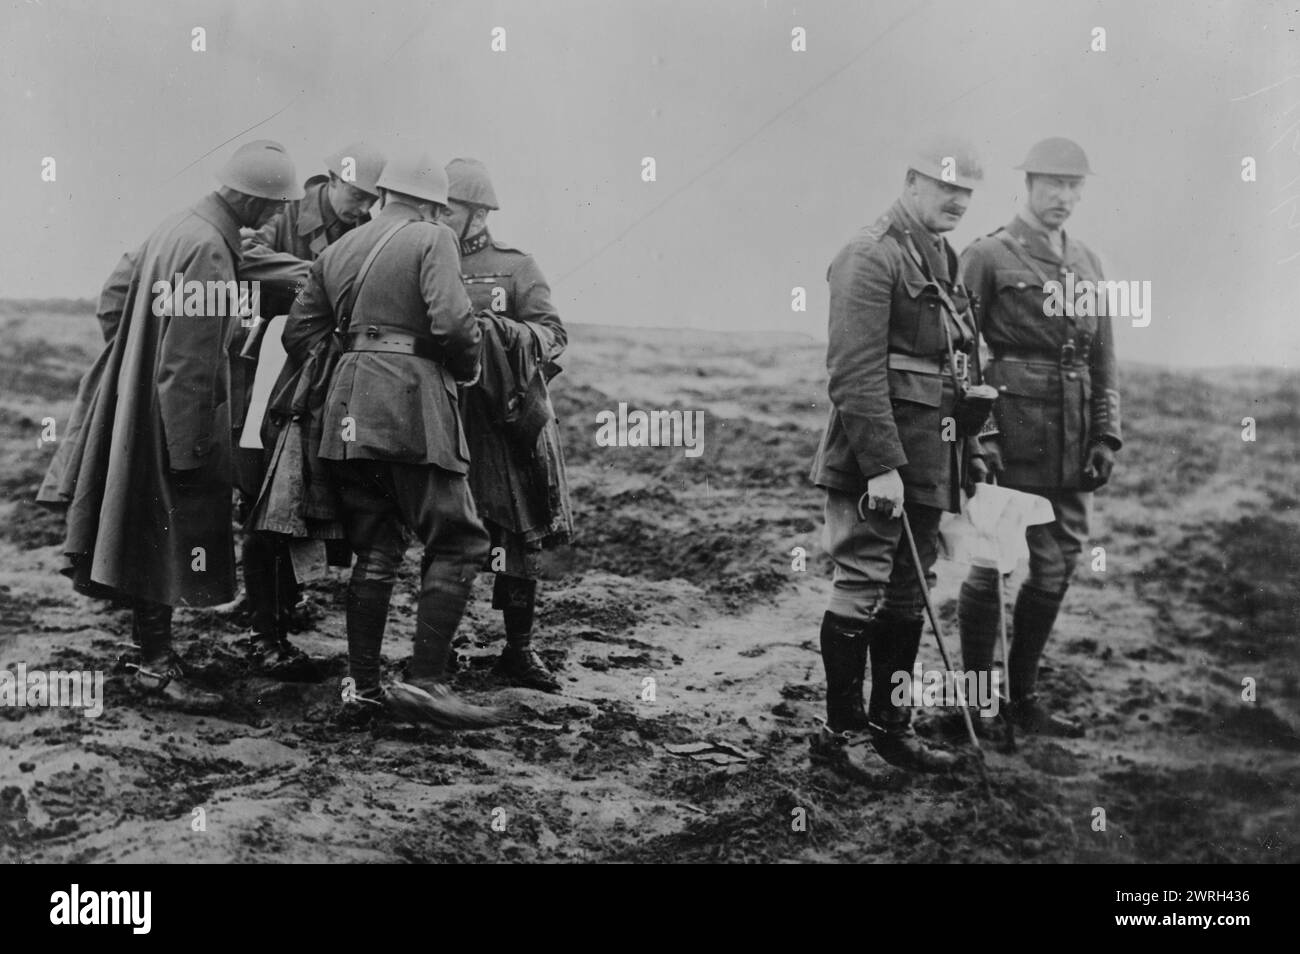 Gen. Allenby, King Albert, 16 May 1917. Albert I of Belgium with British General Edmund Allenby on the ground east of Tilloy-le`s-Mofflaines, Pas-de-Calais, France, which was captured April 9, 1916 during the First Battle of the Scarpe, May 16, 1917 during World War I. Stock Photo